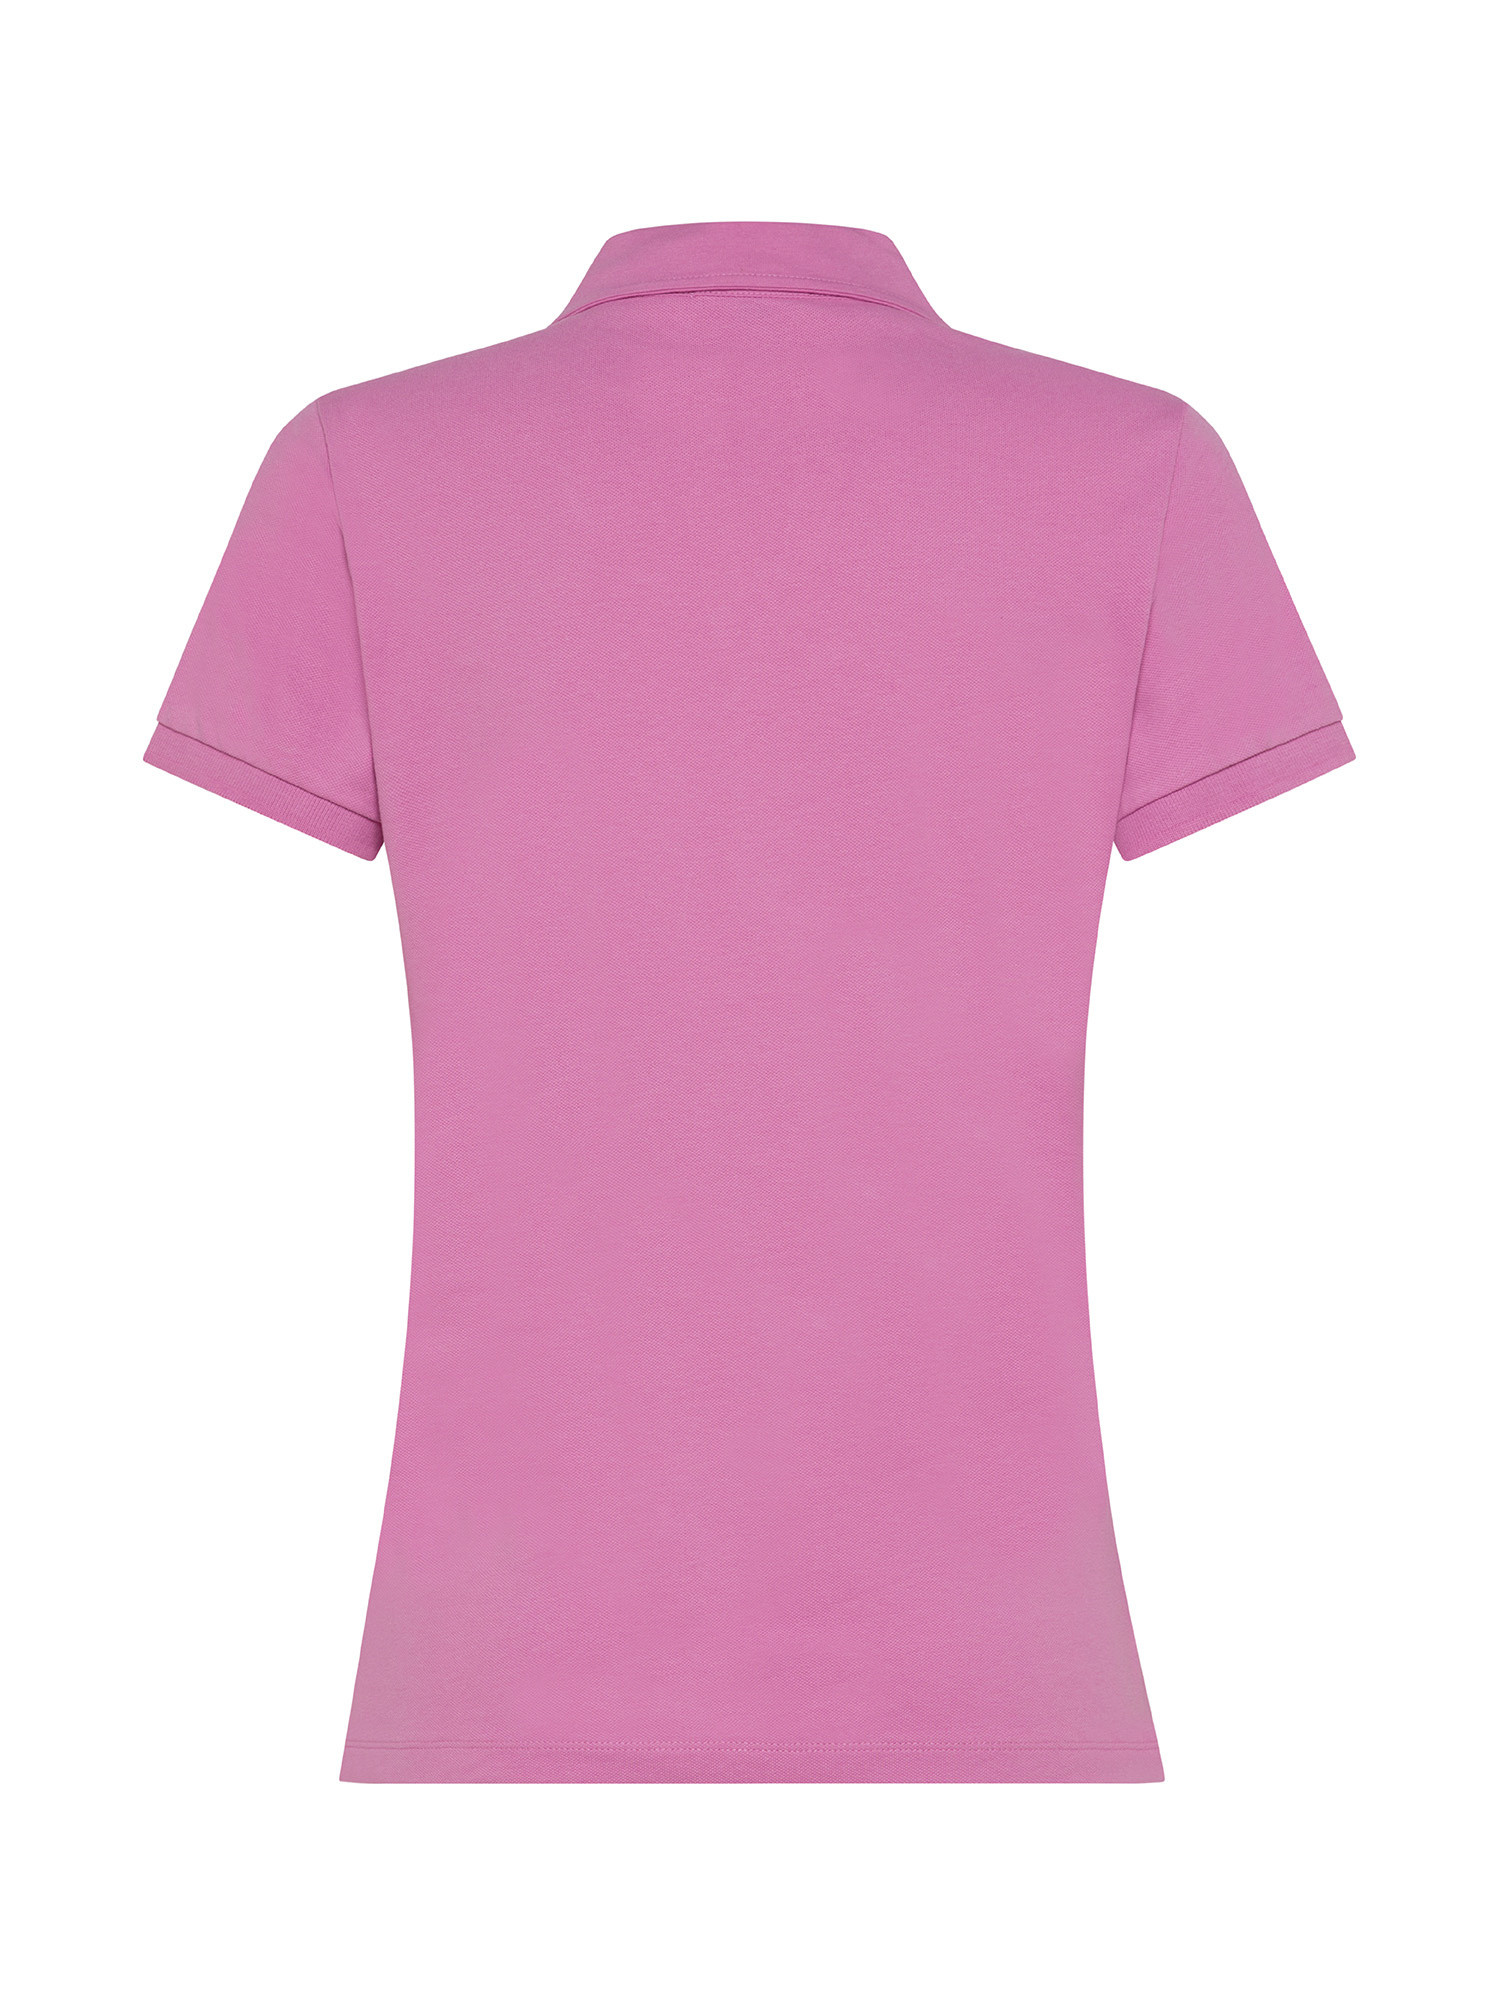 Koan - T-shirt con rouches, Rosa scuro, large image number 1